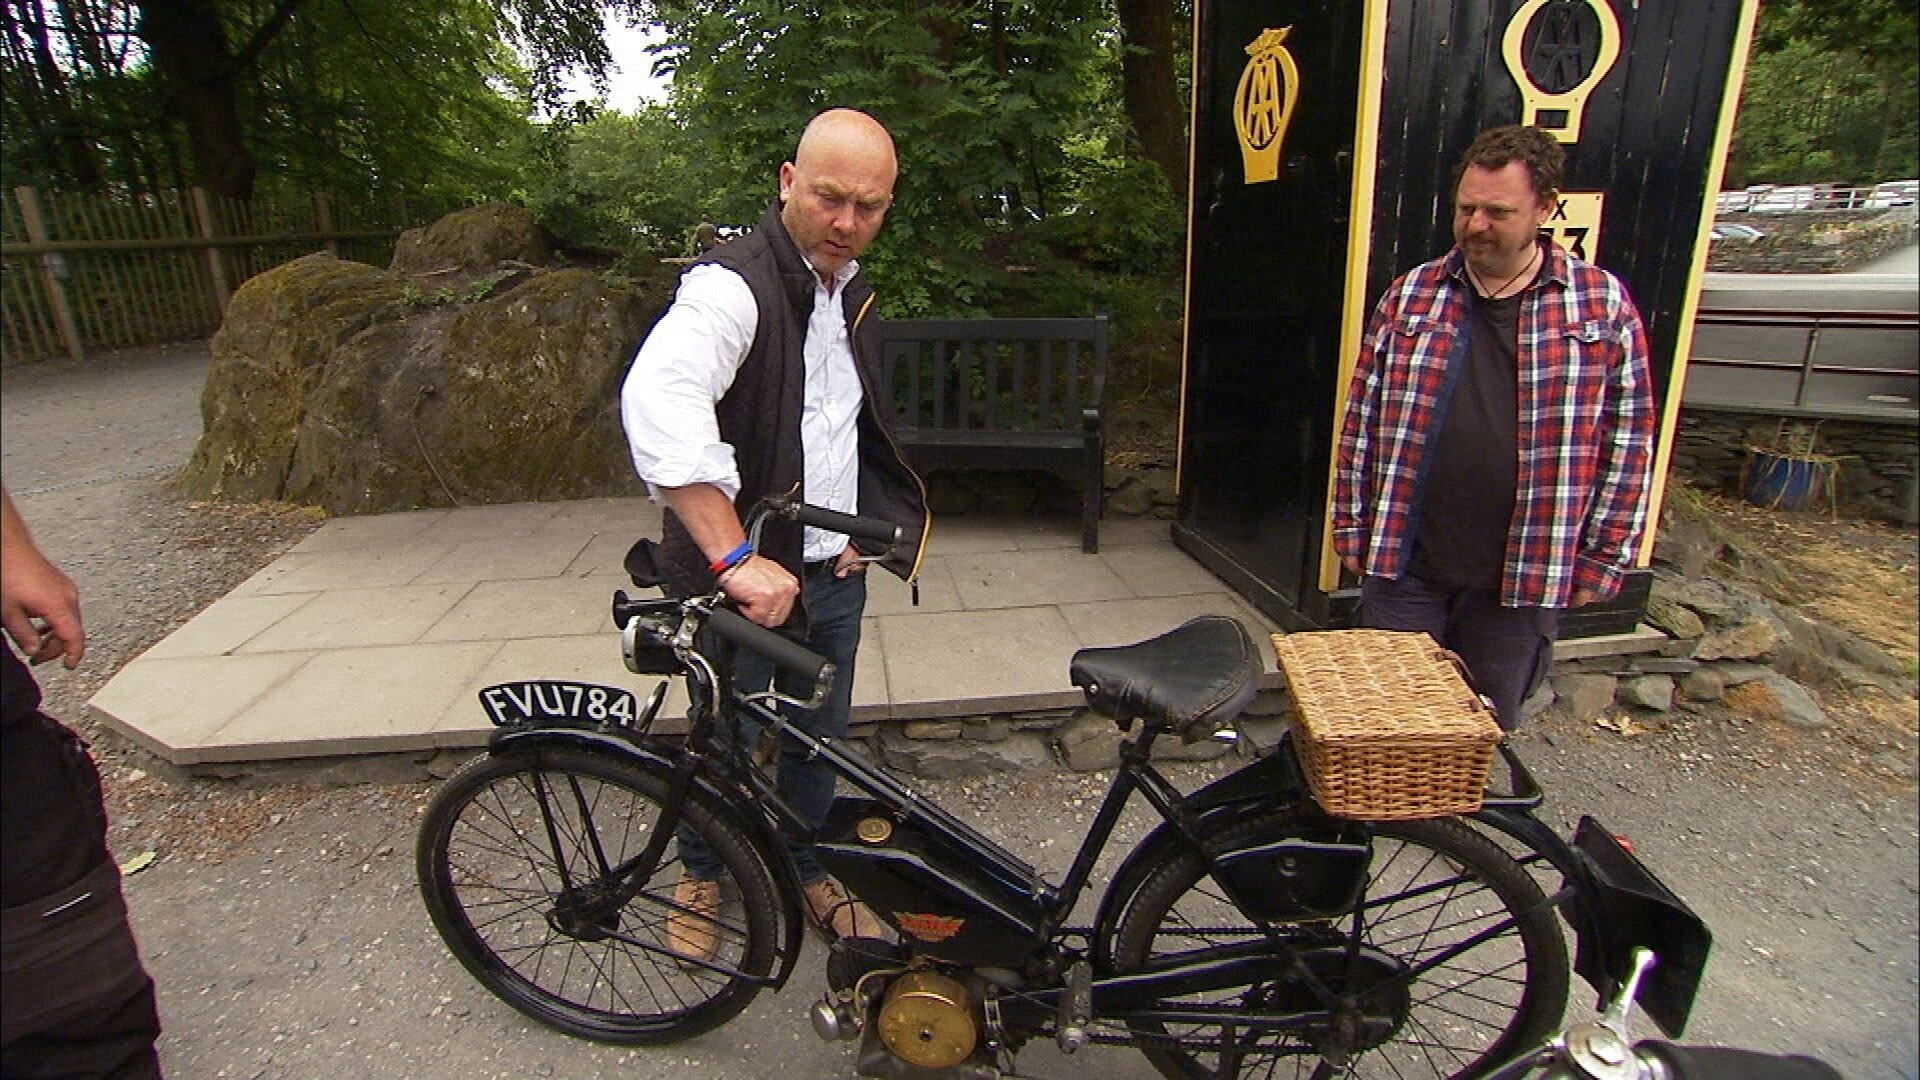 Salvage Hunters: Best Buys — s01e06 — Episode 6